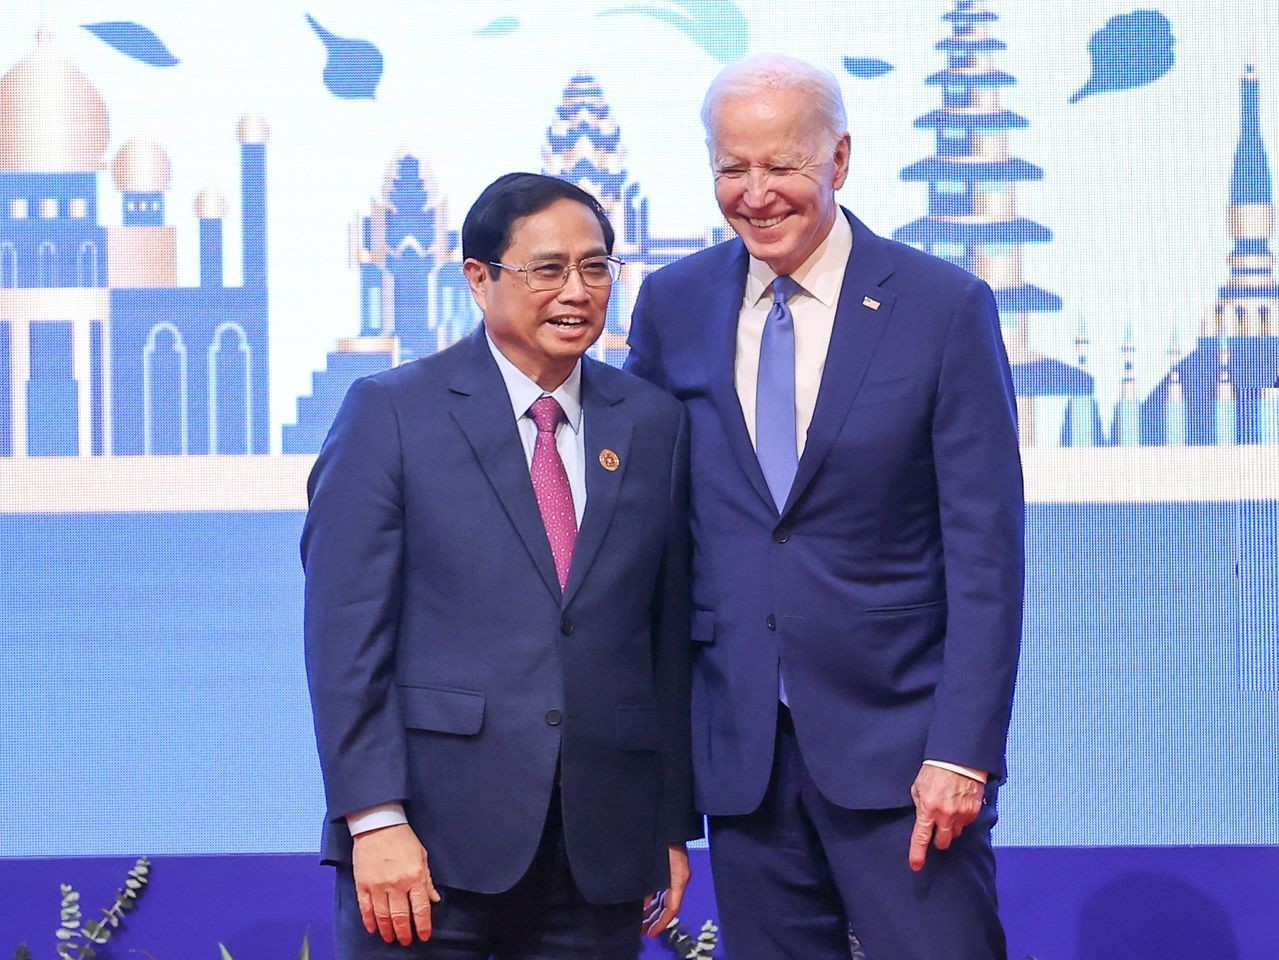 President Joe Biden met Prime Minister Pham Minh Chinh at the 10th annual U.S.-ASEAN Summit in Cambodia. During the Summit, POTUS and the ASEAN leaders elevated U.S.-ASEAN relations to a Comprehensive Strategic Partnership.  Photo credit: VGP/Nhật Bắc